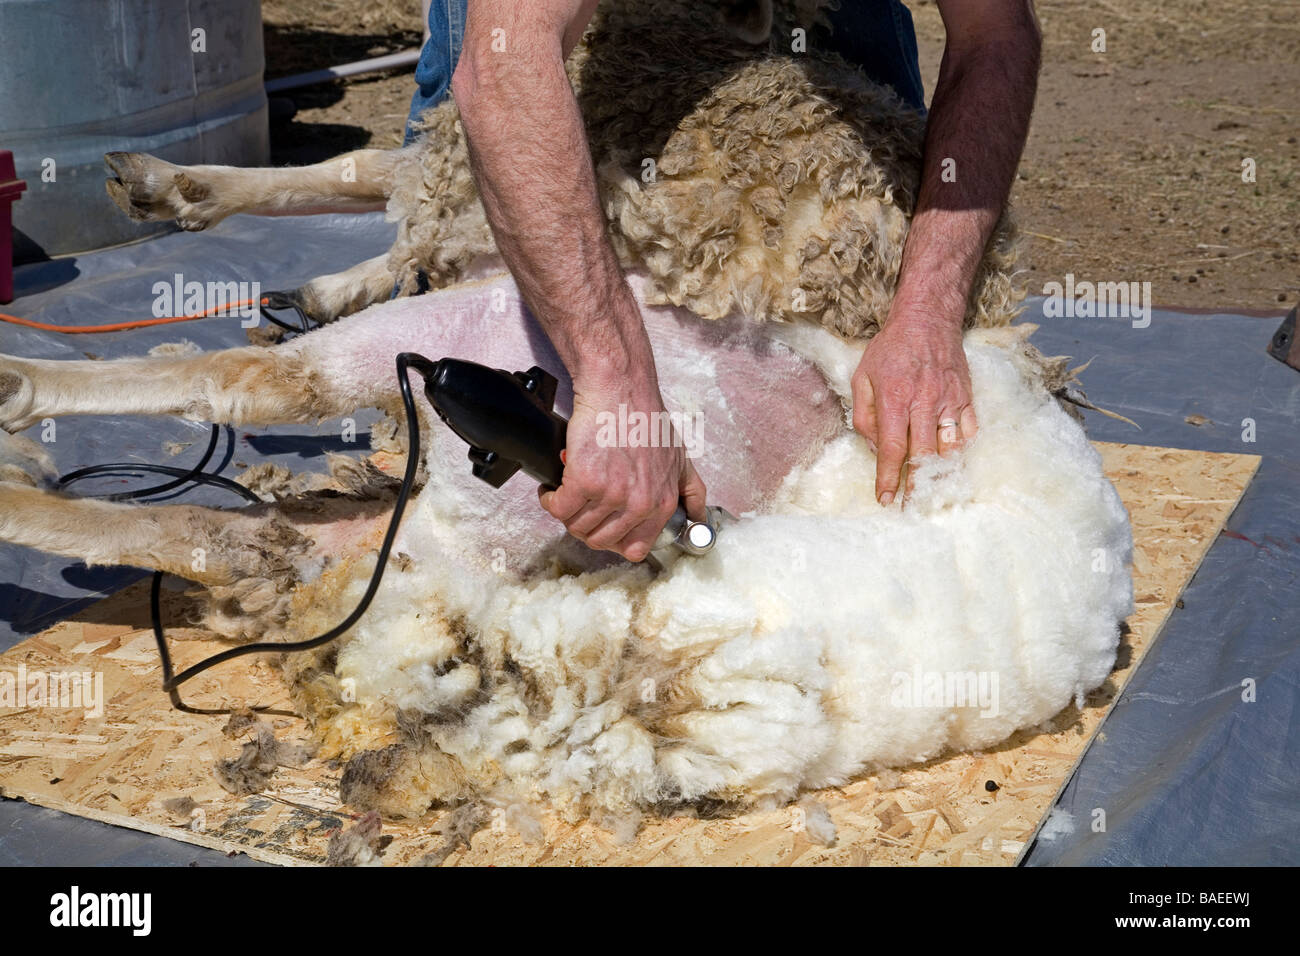 USA OREGON A sheep shearer shears the wool from a large sheep on a farm near Bend Oregon in the spring Stock Photo